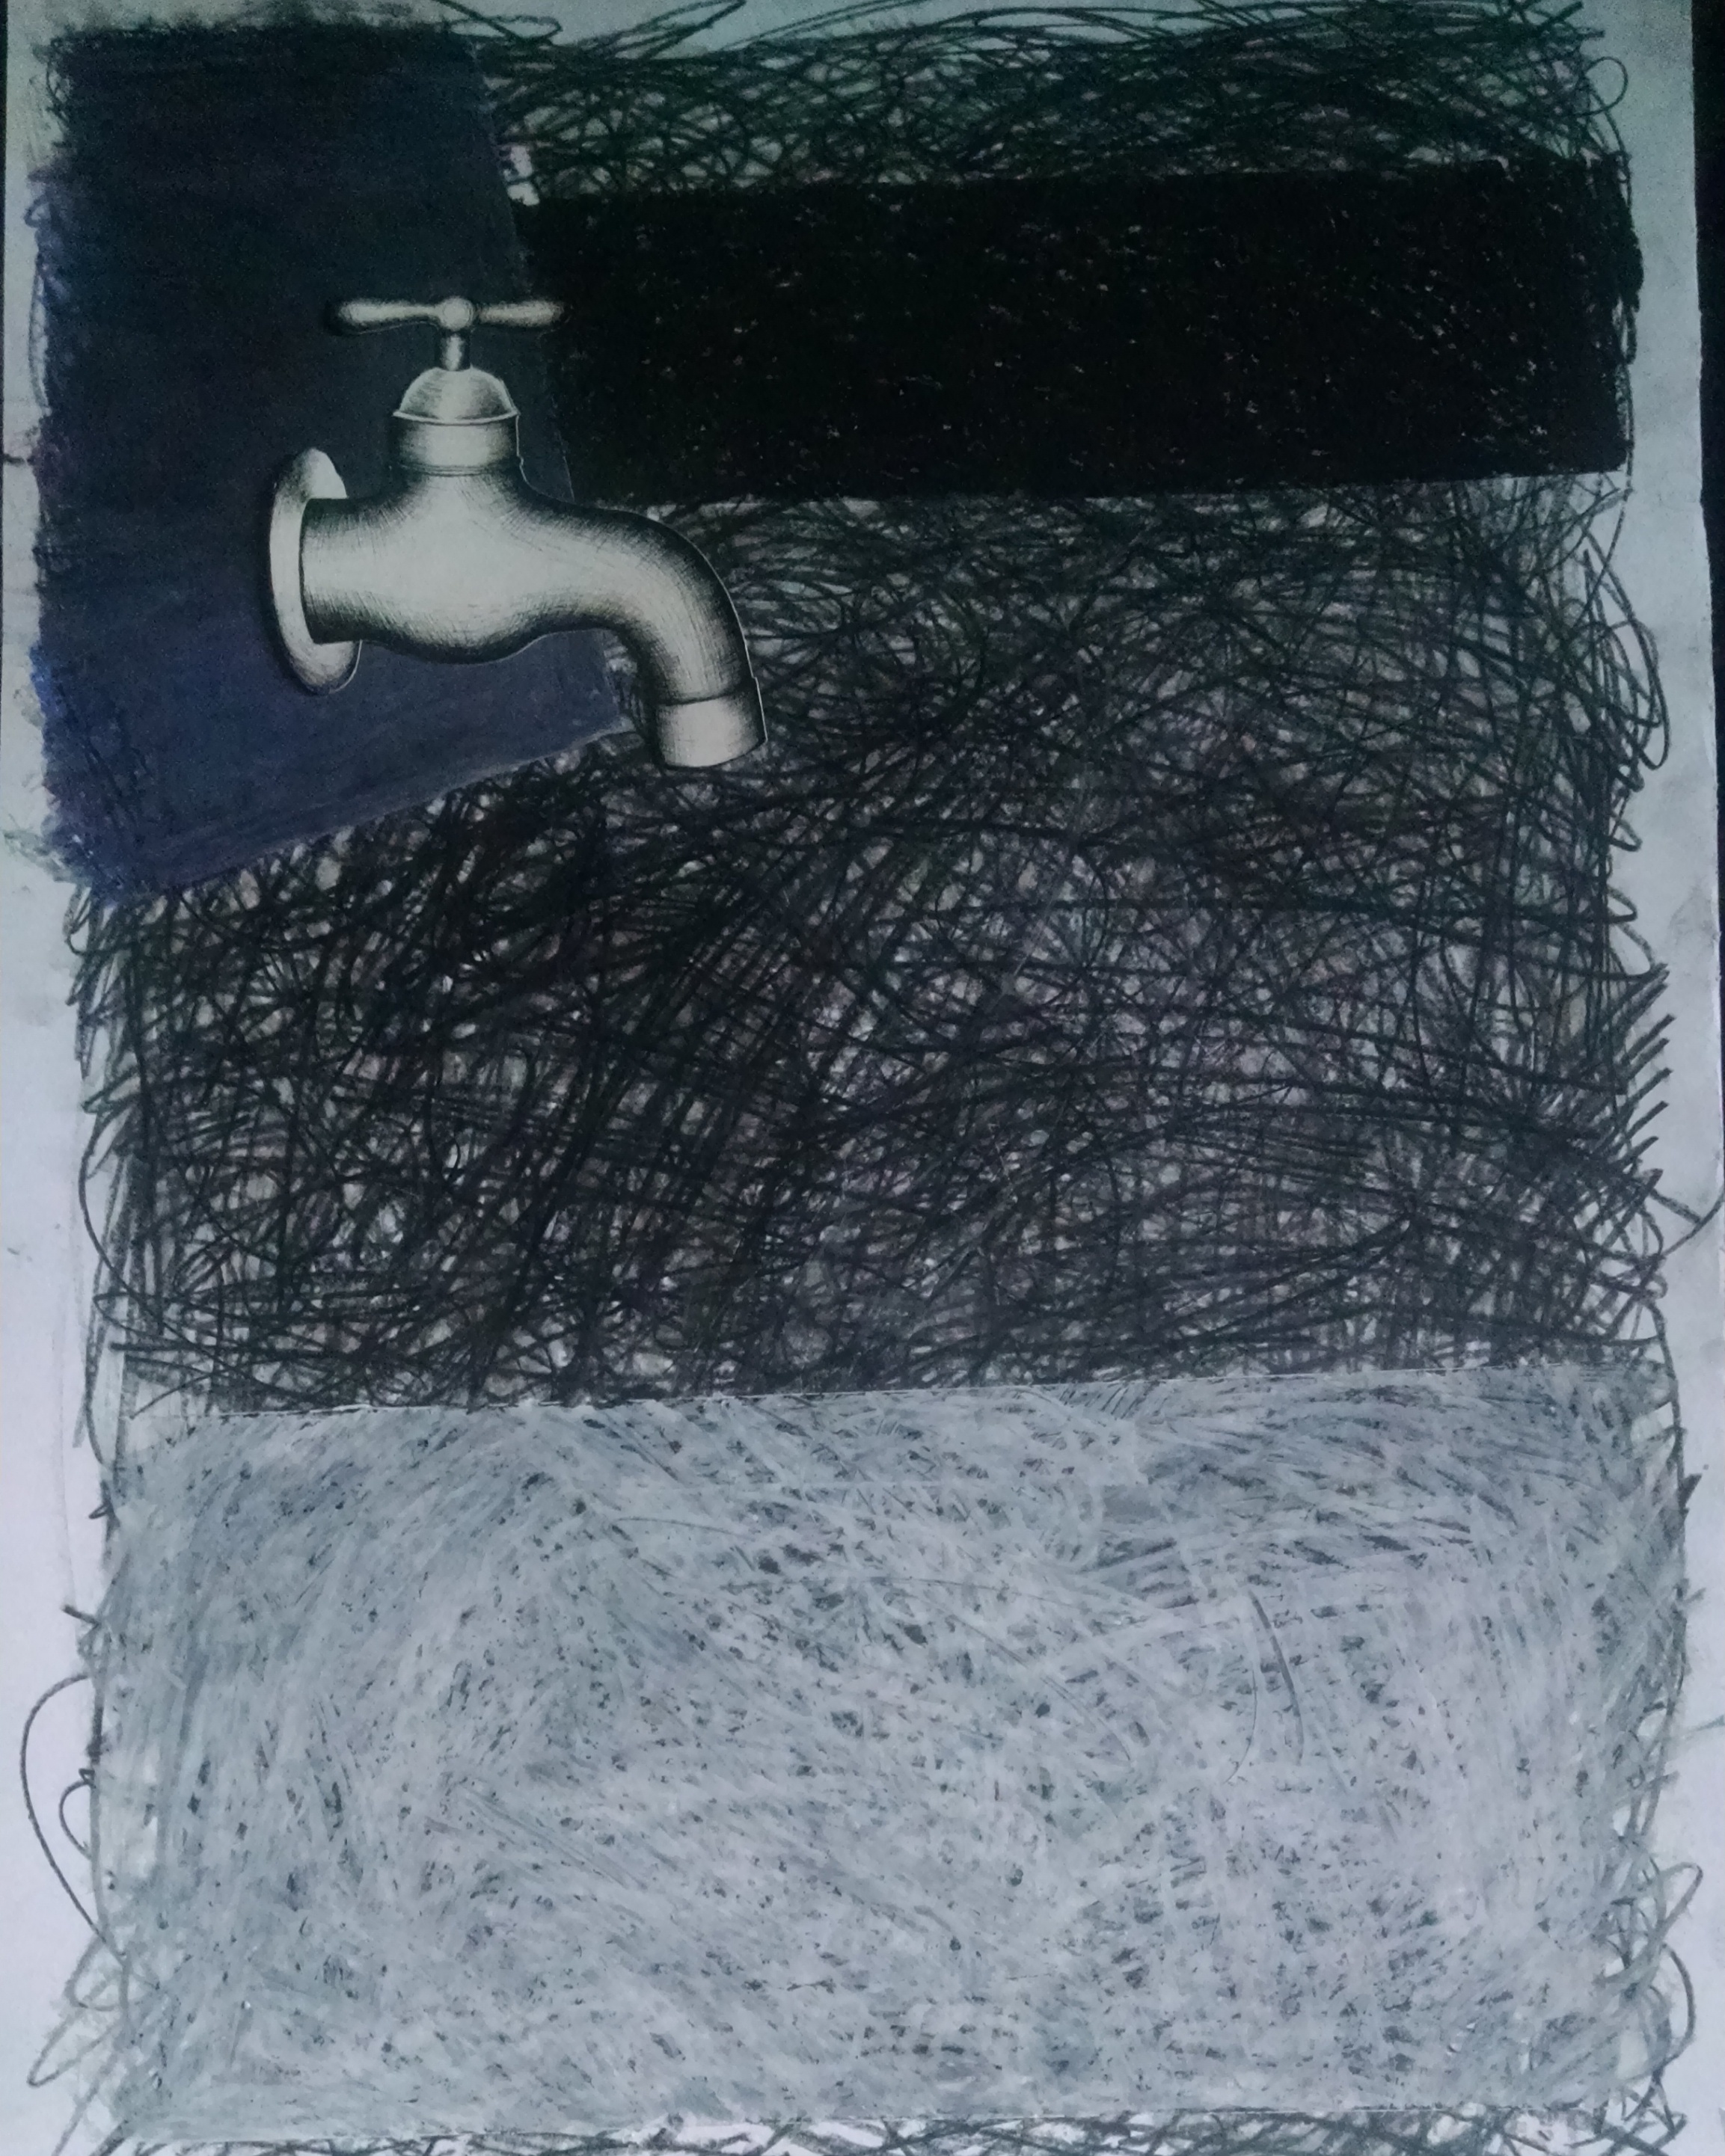 Drawing a faucet and collaging it on